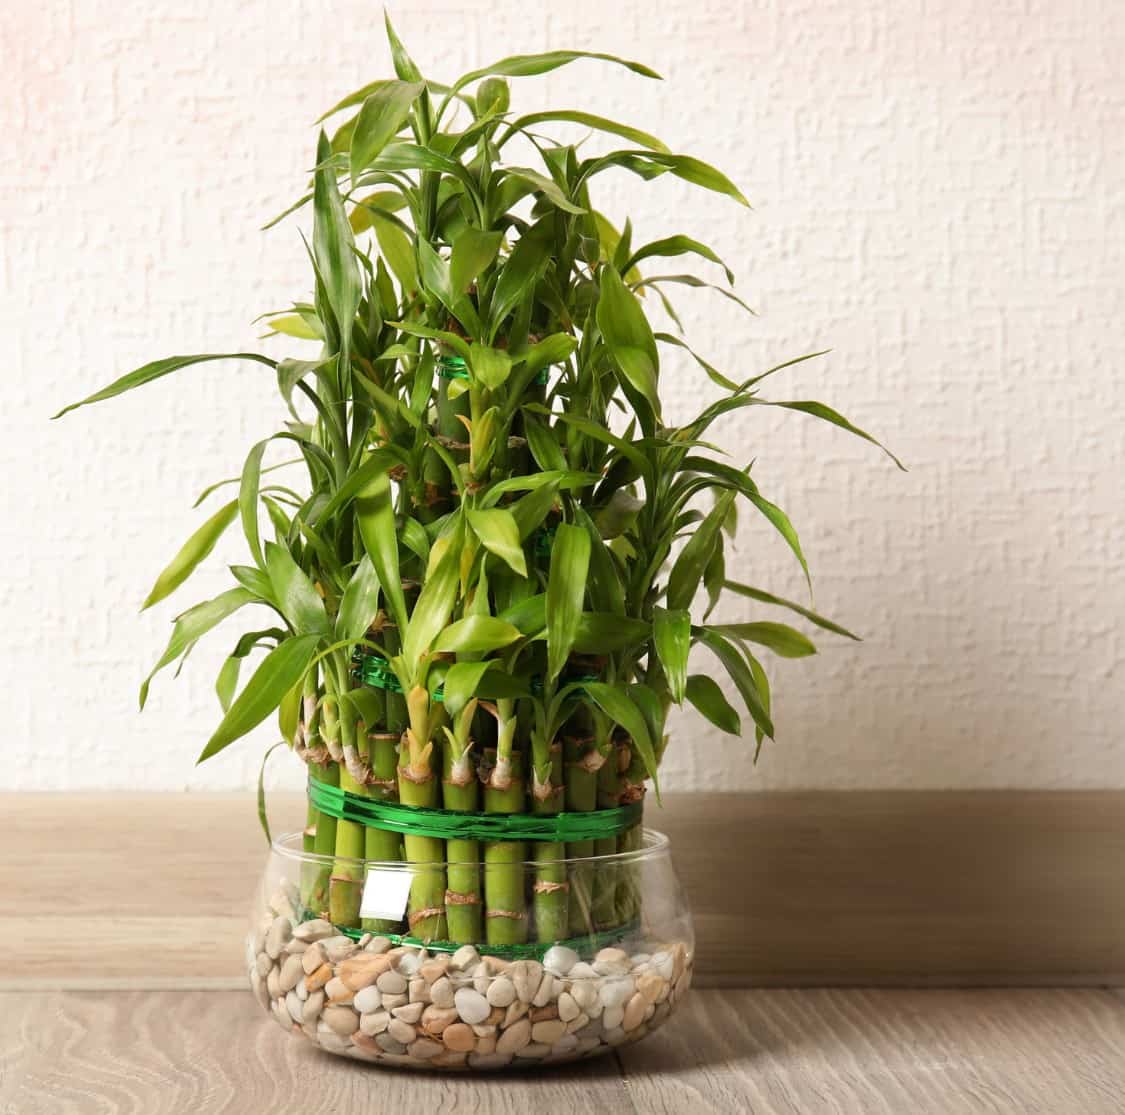 lucky bamboo is an unusual plant that adds interest to any room